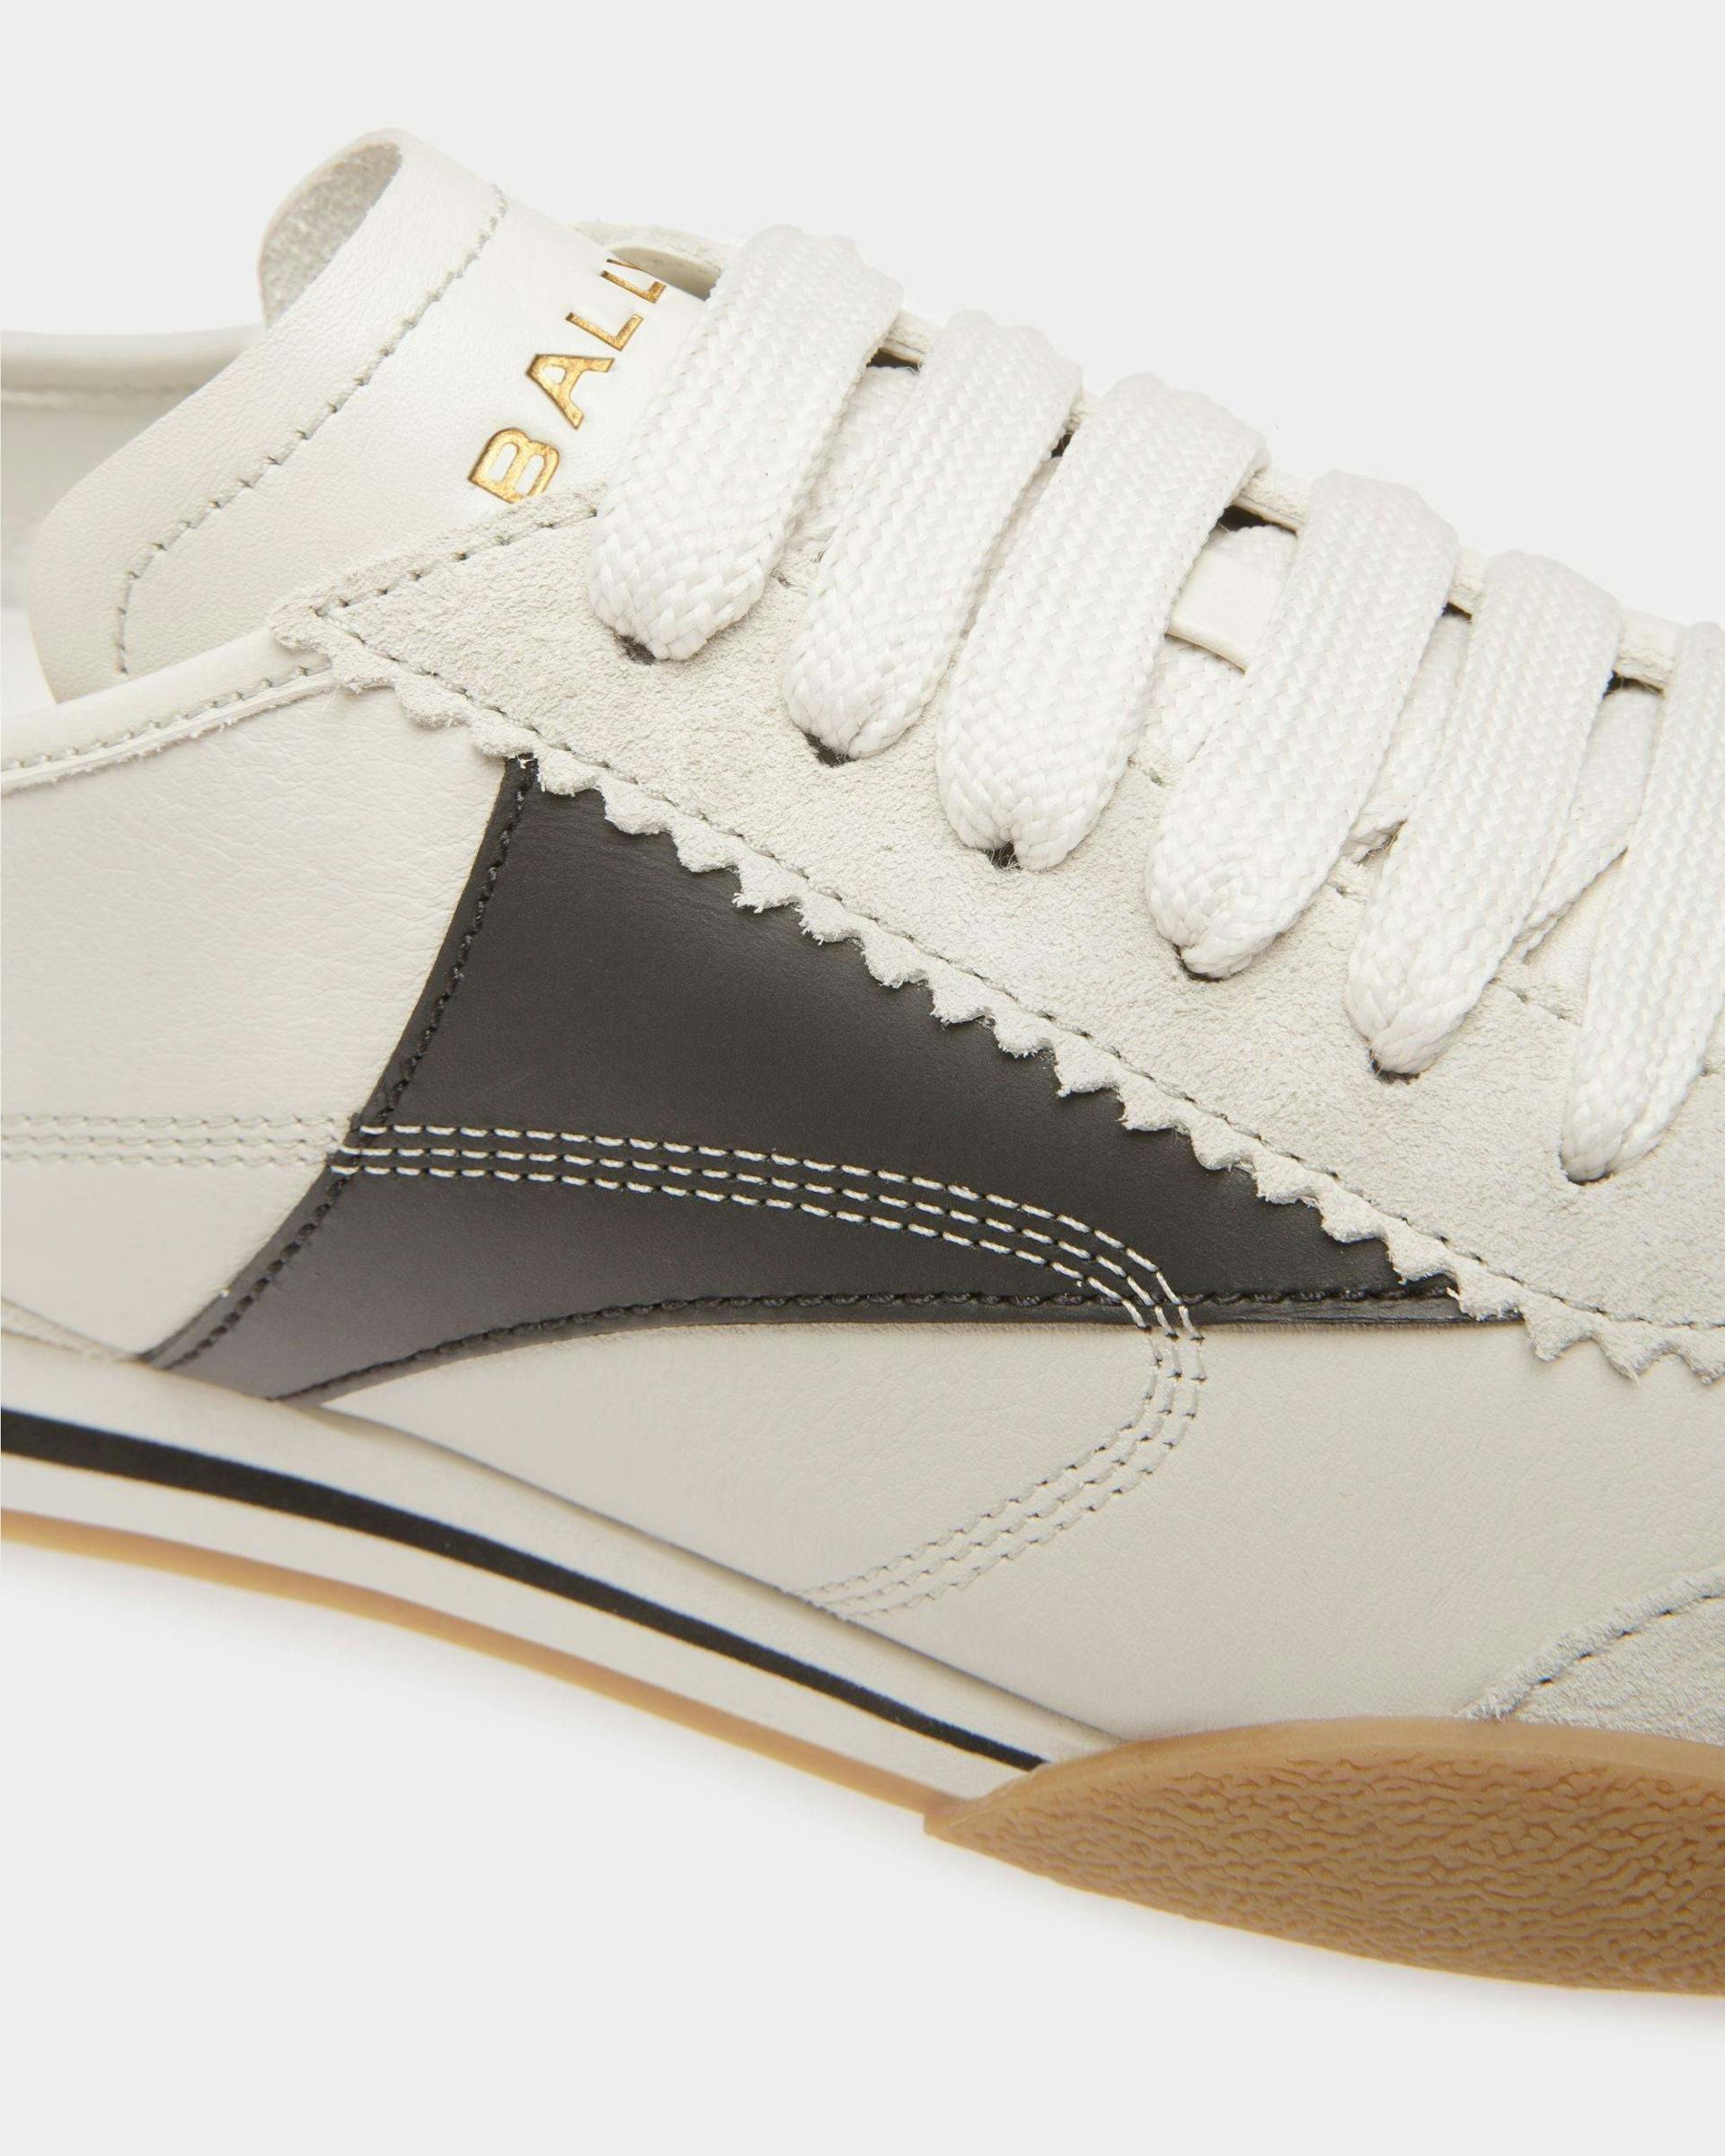 Men's Sussex Sneakers In Black And Dusty White Leather | Bally | Still Life Detail